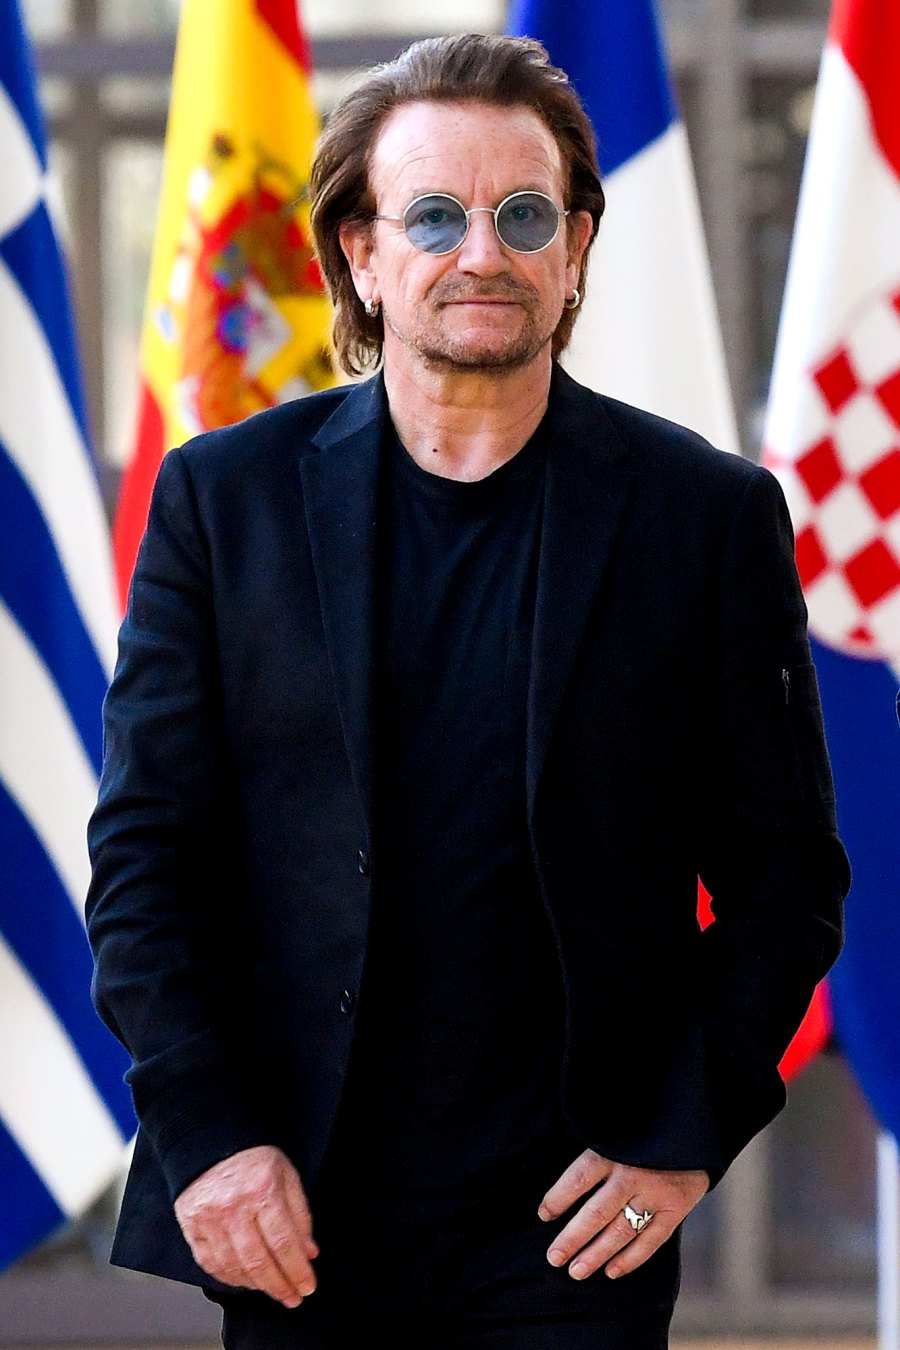 bono Stars Who Have Attended Hillsong Church Justin Bieber, Hailey Bieber, Selena Gomez and More